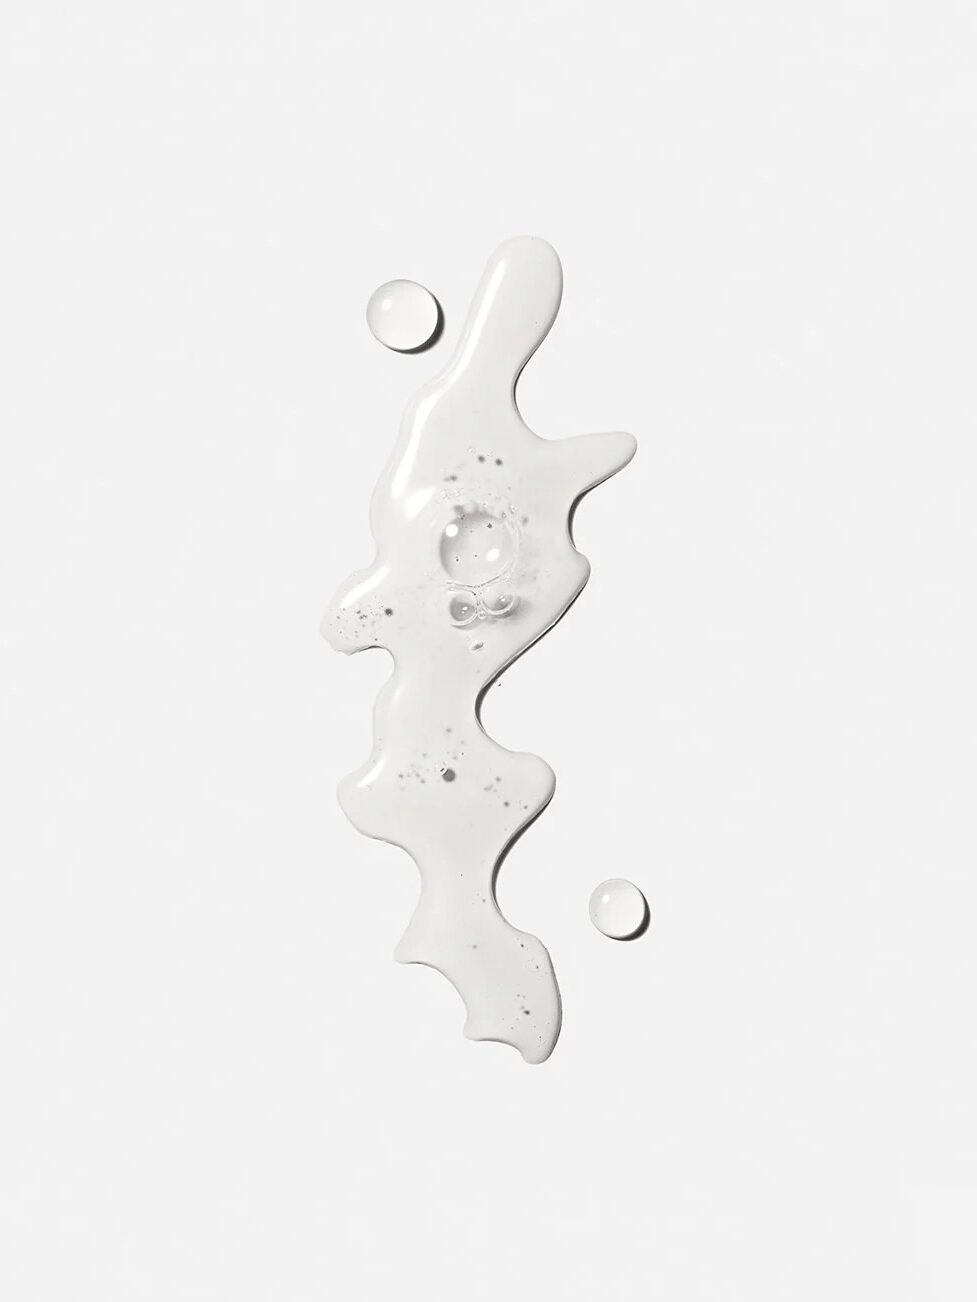 A white, liquid substance with a wavy shape and tiny bubbles is surrounded by two small droplets against a plain white background.